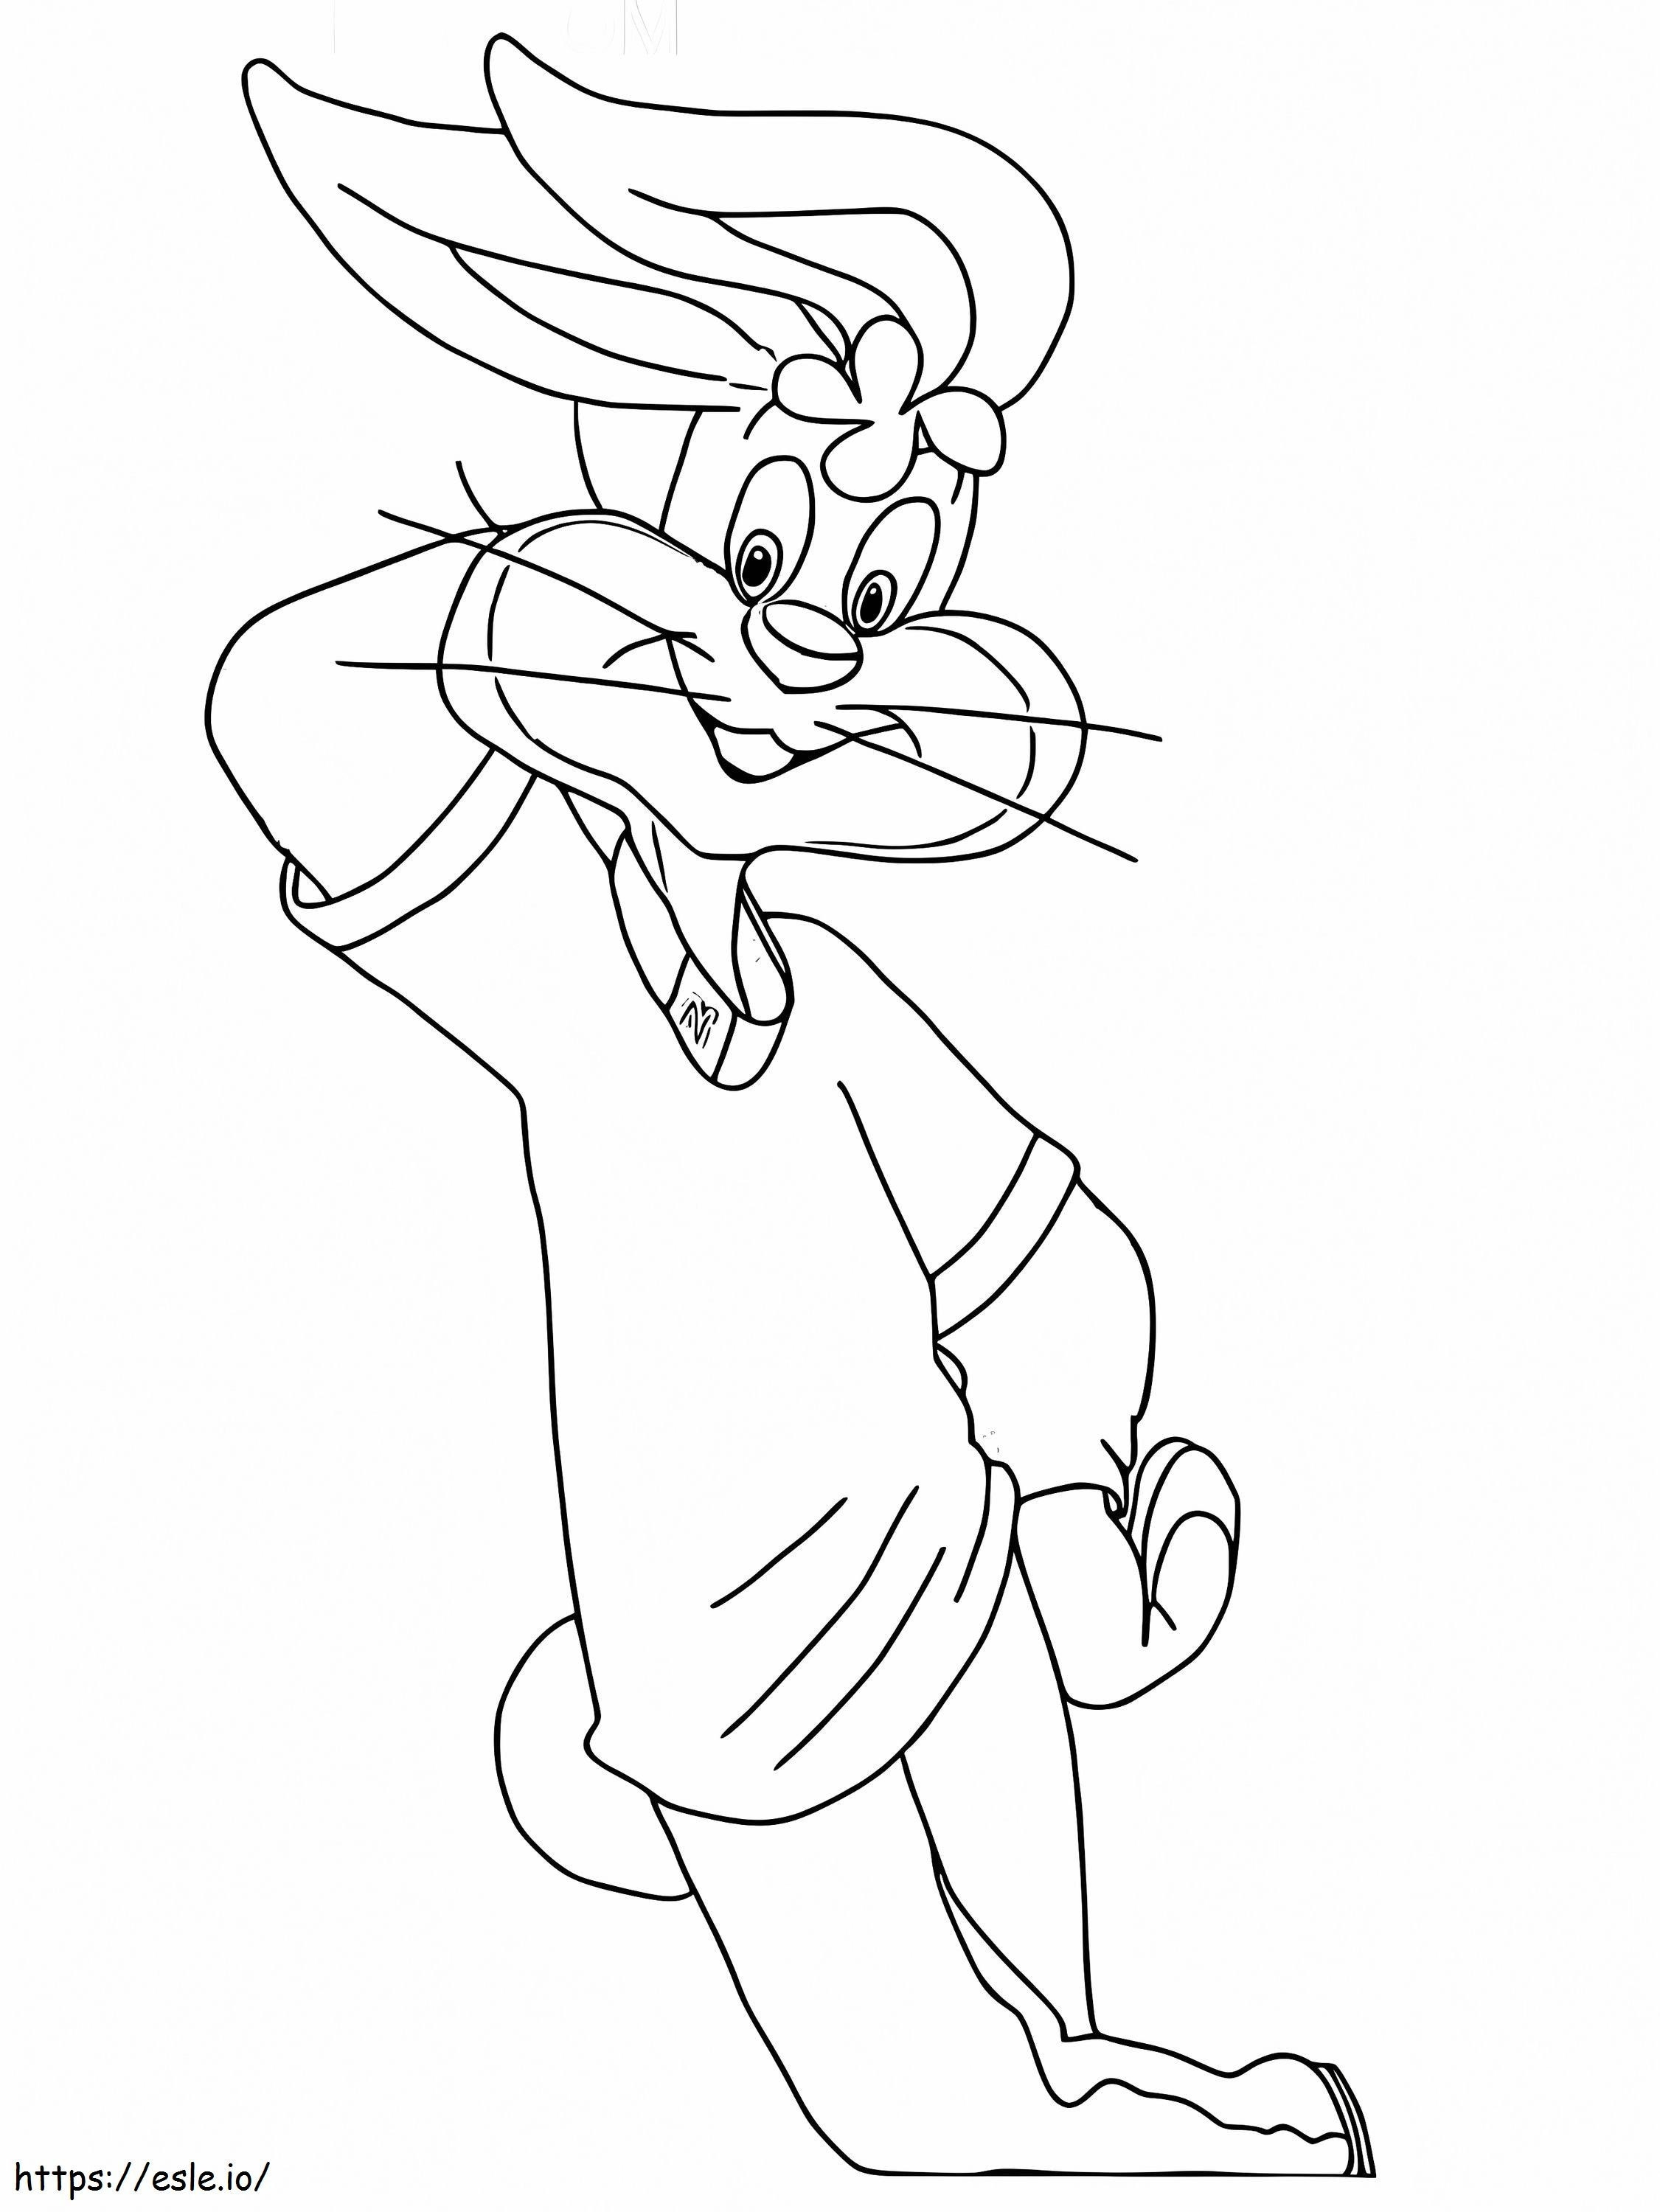 Nesquik Printable coloring page